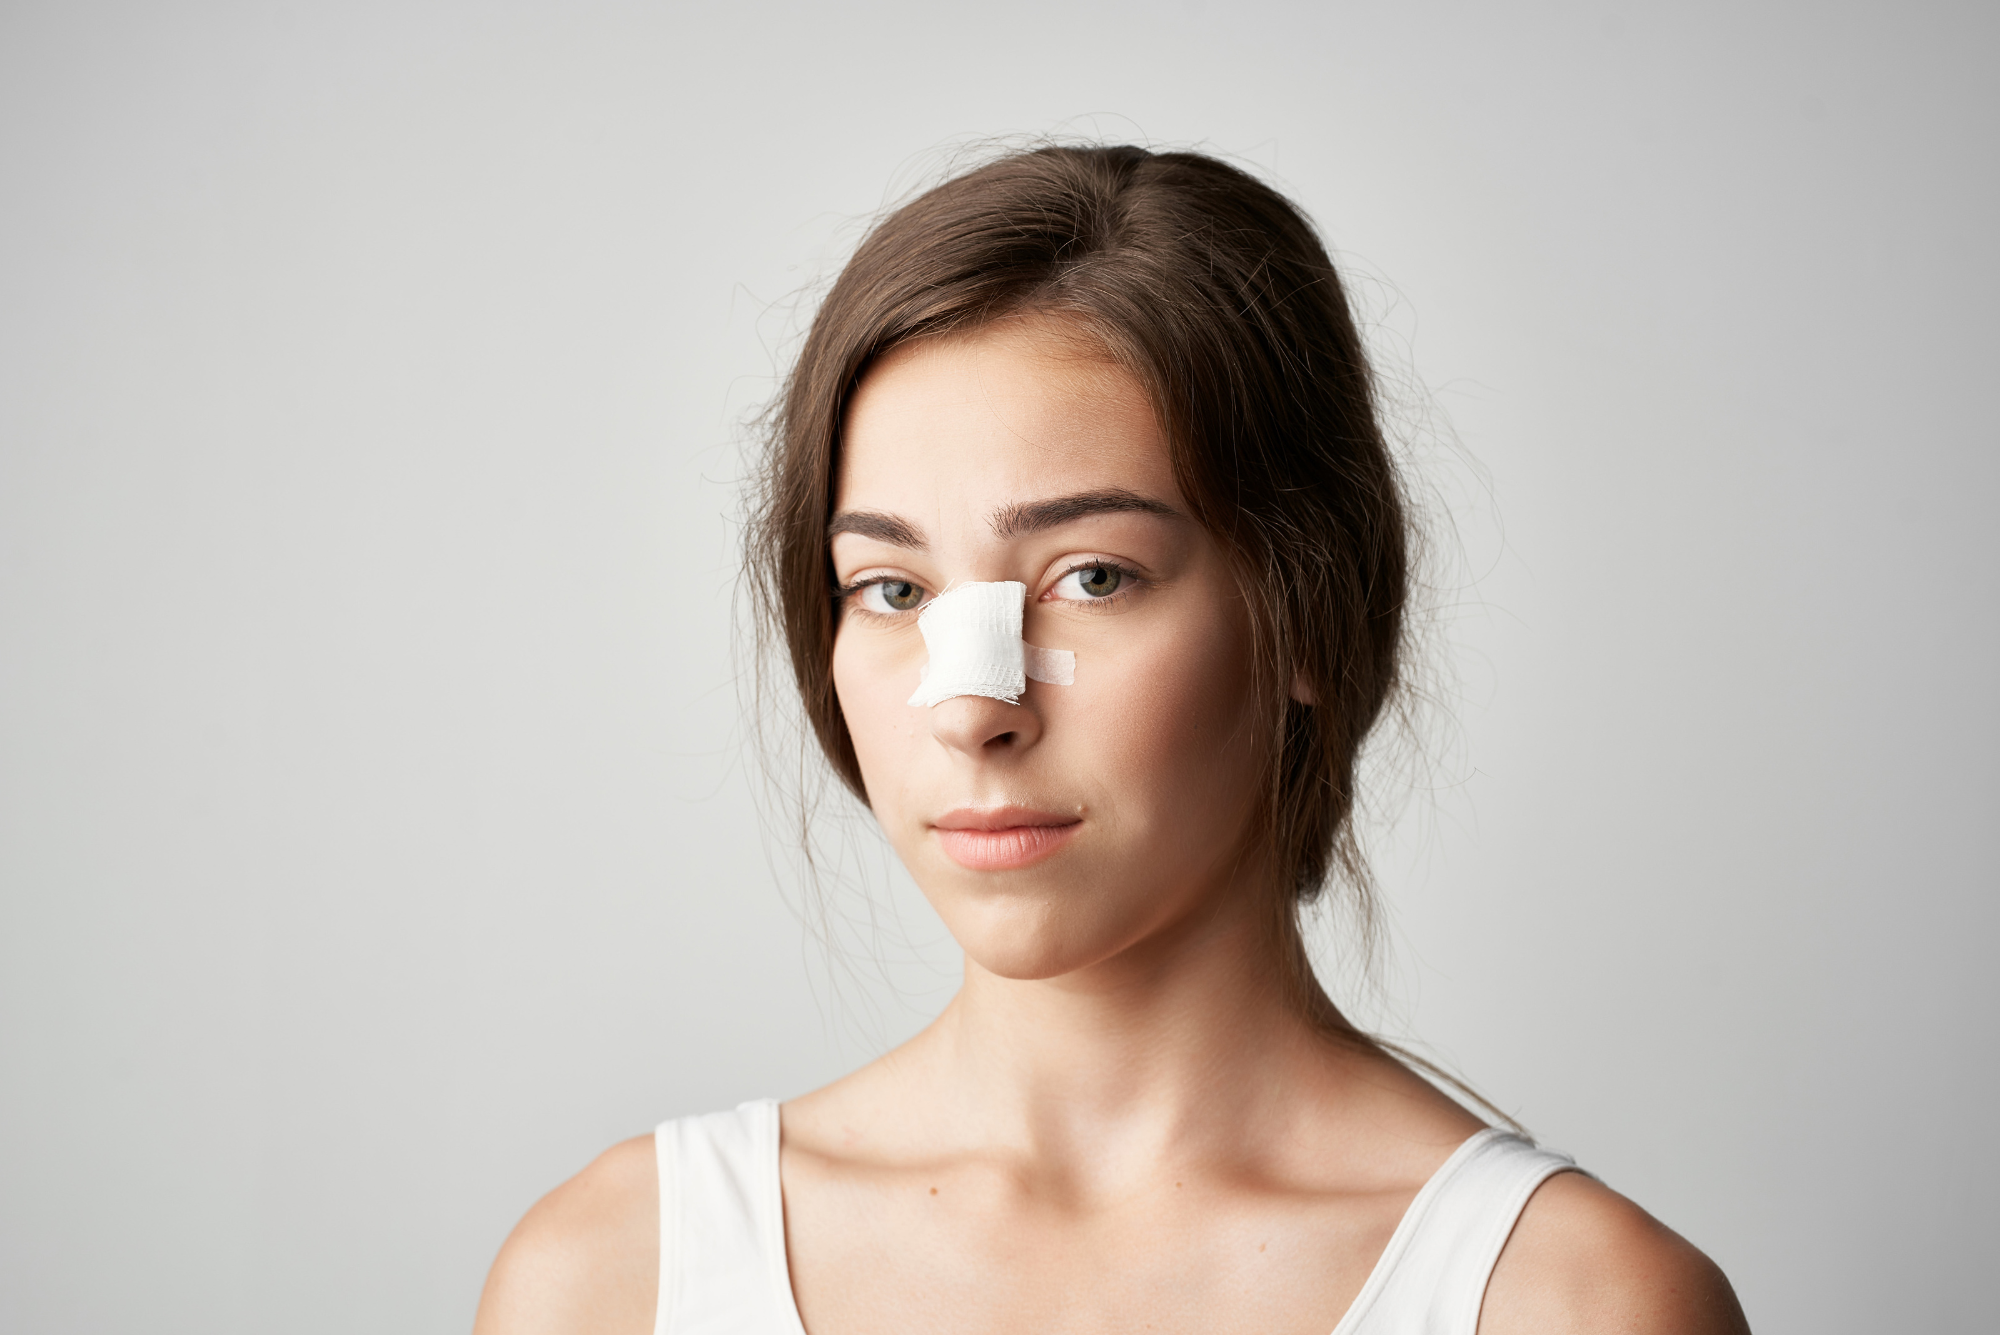 A teenager has a bandage taped over top of her nasal fracture because she just had a closed reduction procedure done.